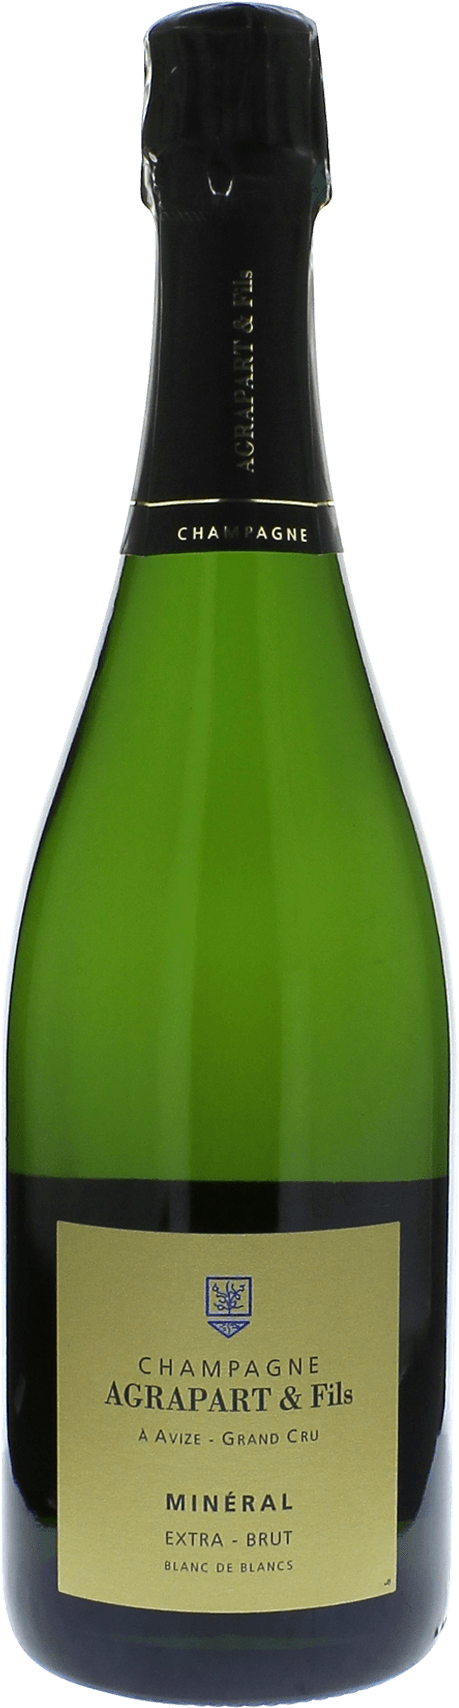 Agrapart  mineral extra brut blanc de blancs grand cru 2017  Agrapart & Fils, Champagne